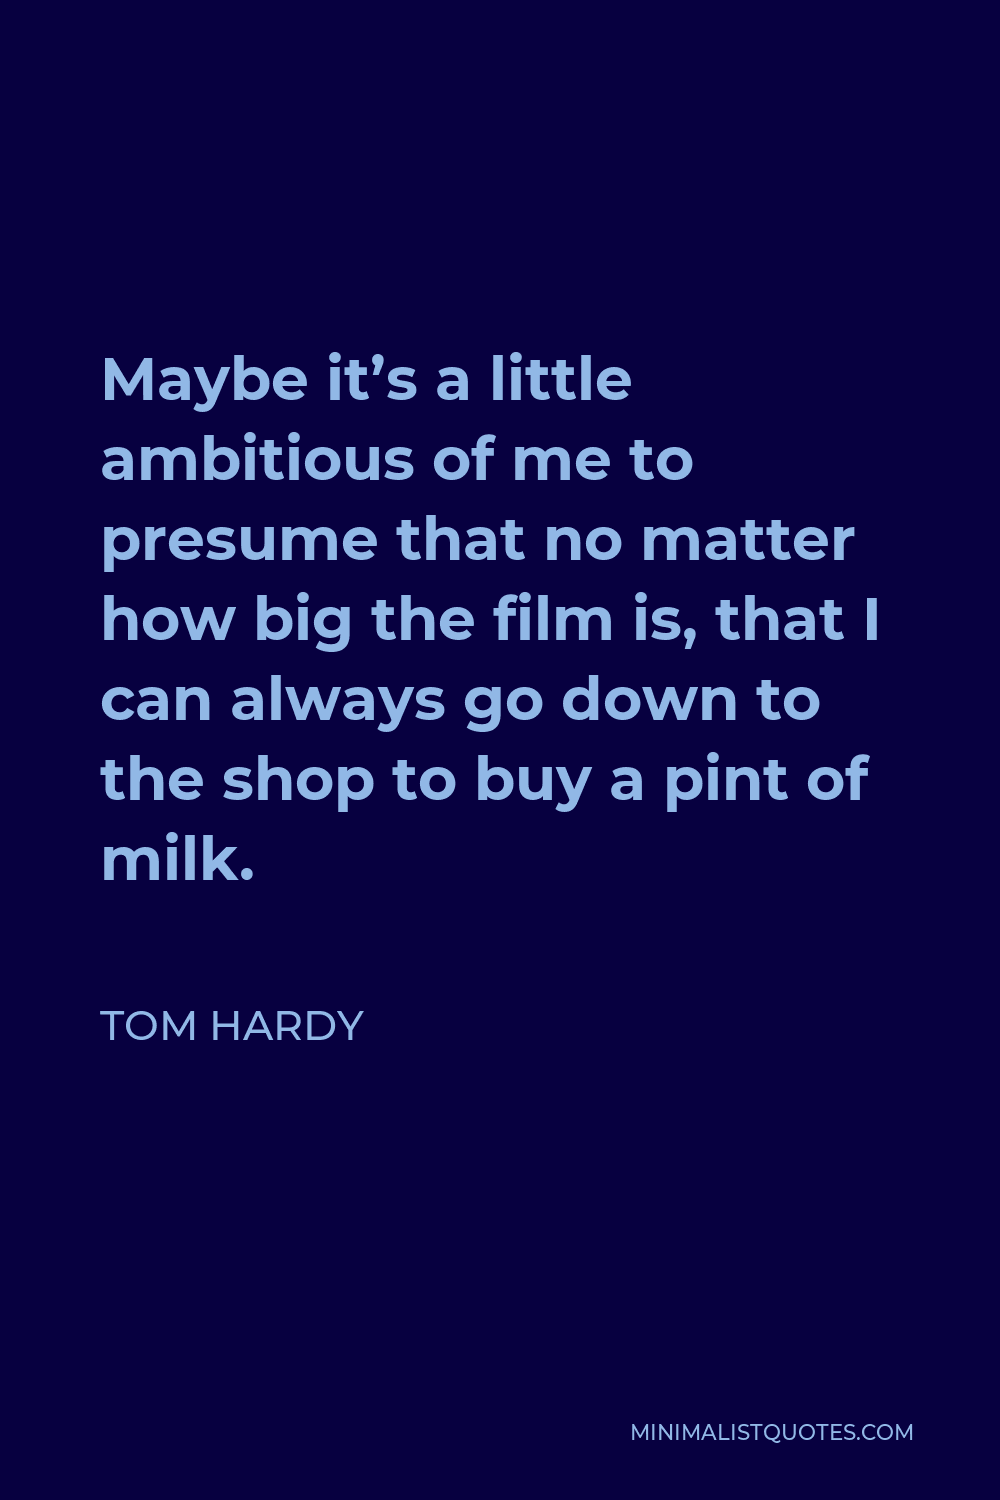 Tom Hardy Quote - Maybe it’s a little ambitious of me to presume that no matter how big the film is, that I can always go down to the shop to buy a pint of milk.